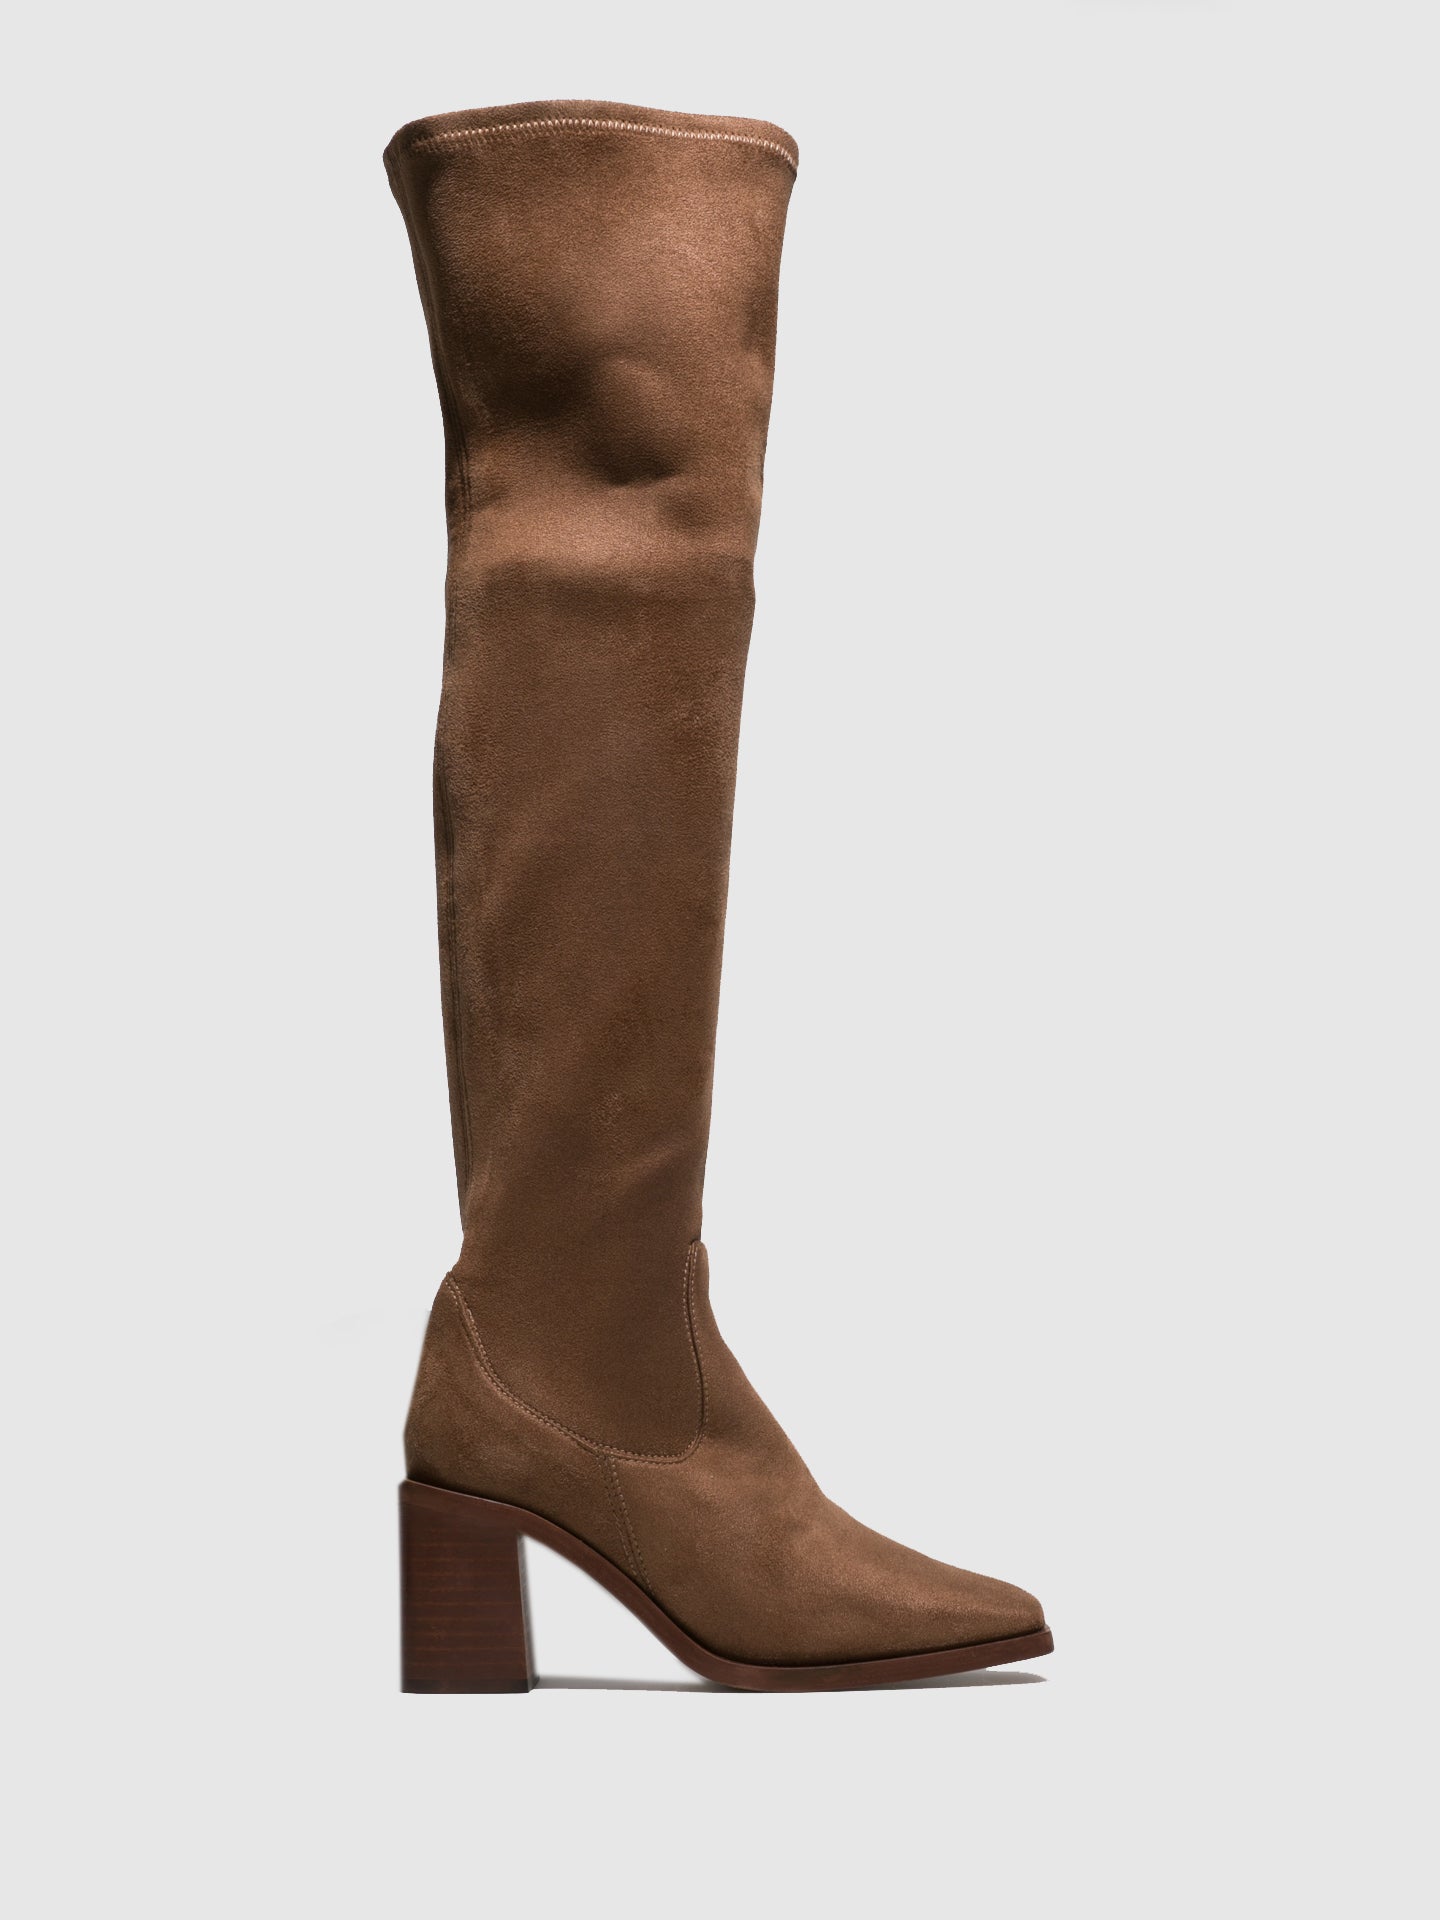 Foreva Taupe Knee-High Boots